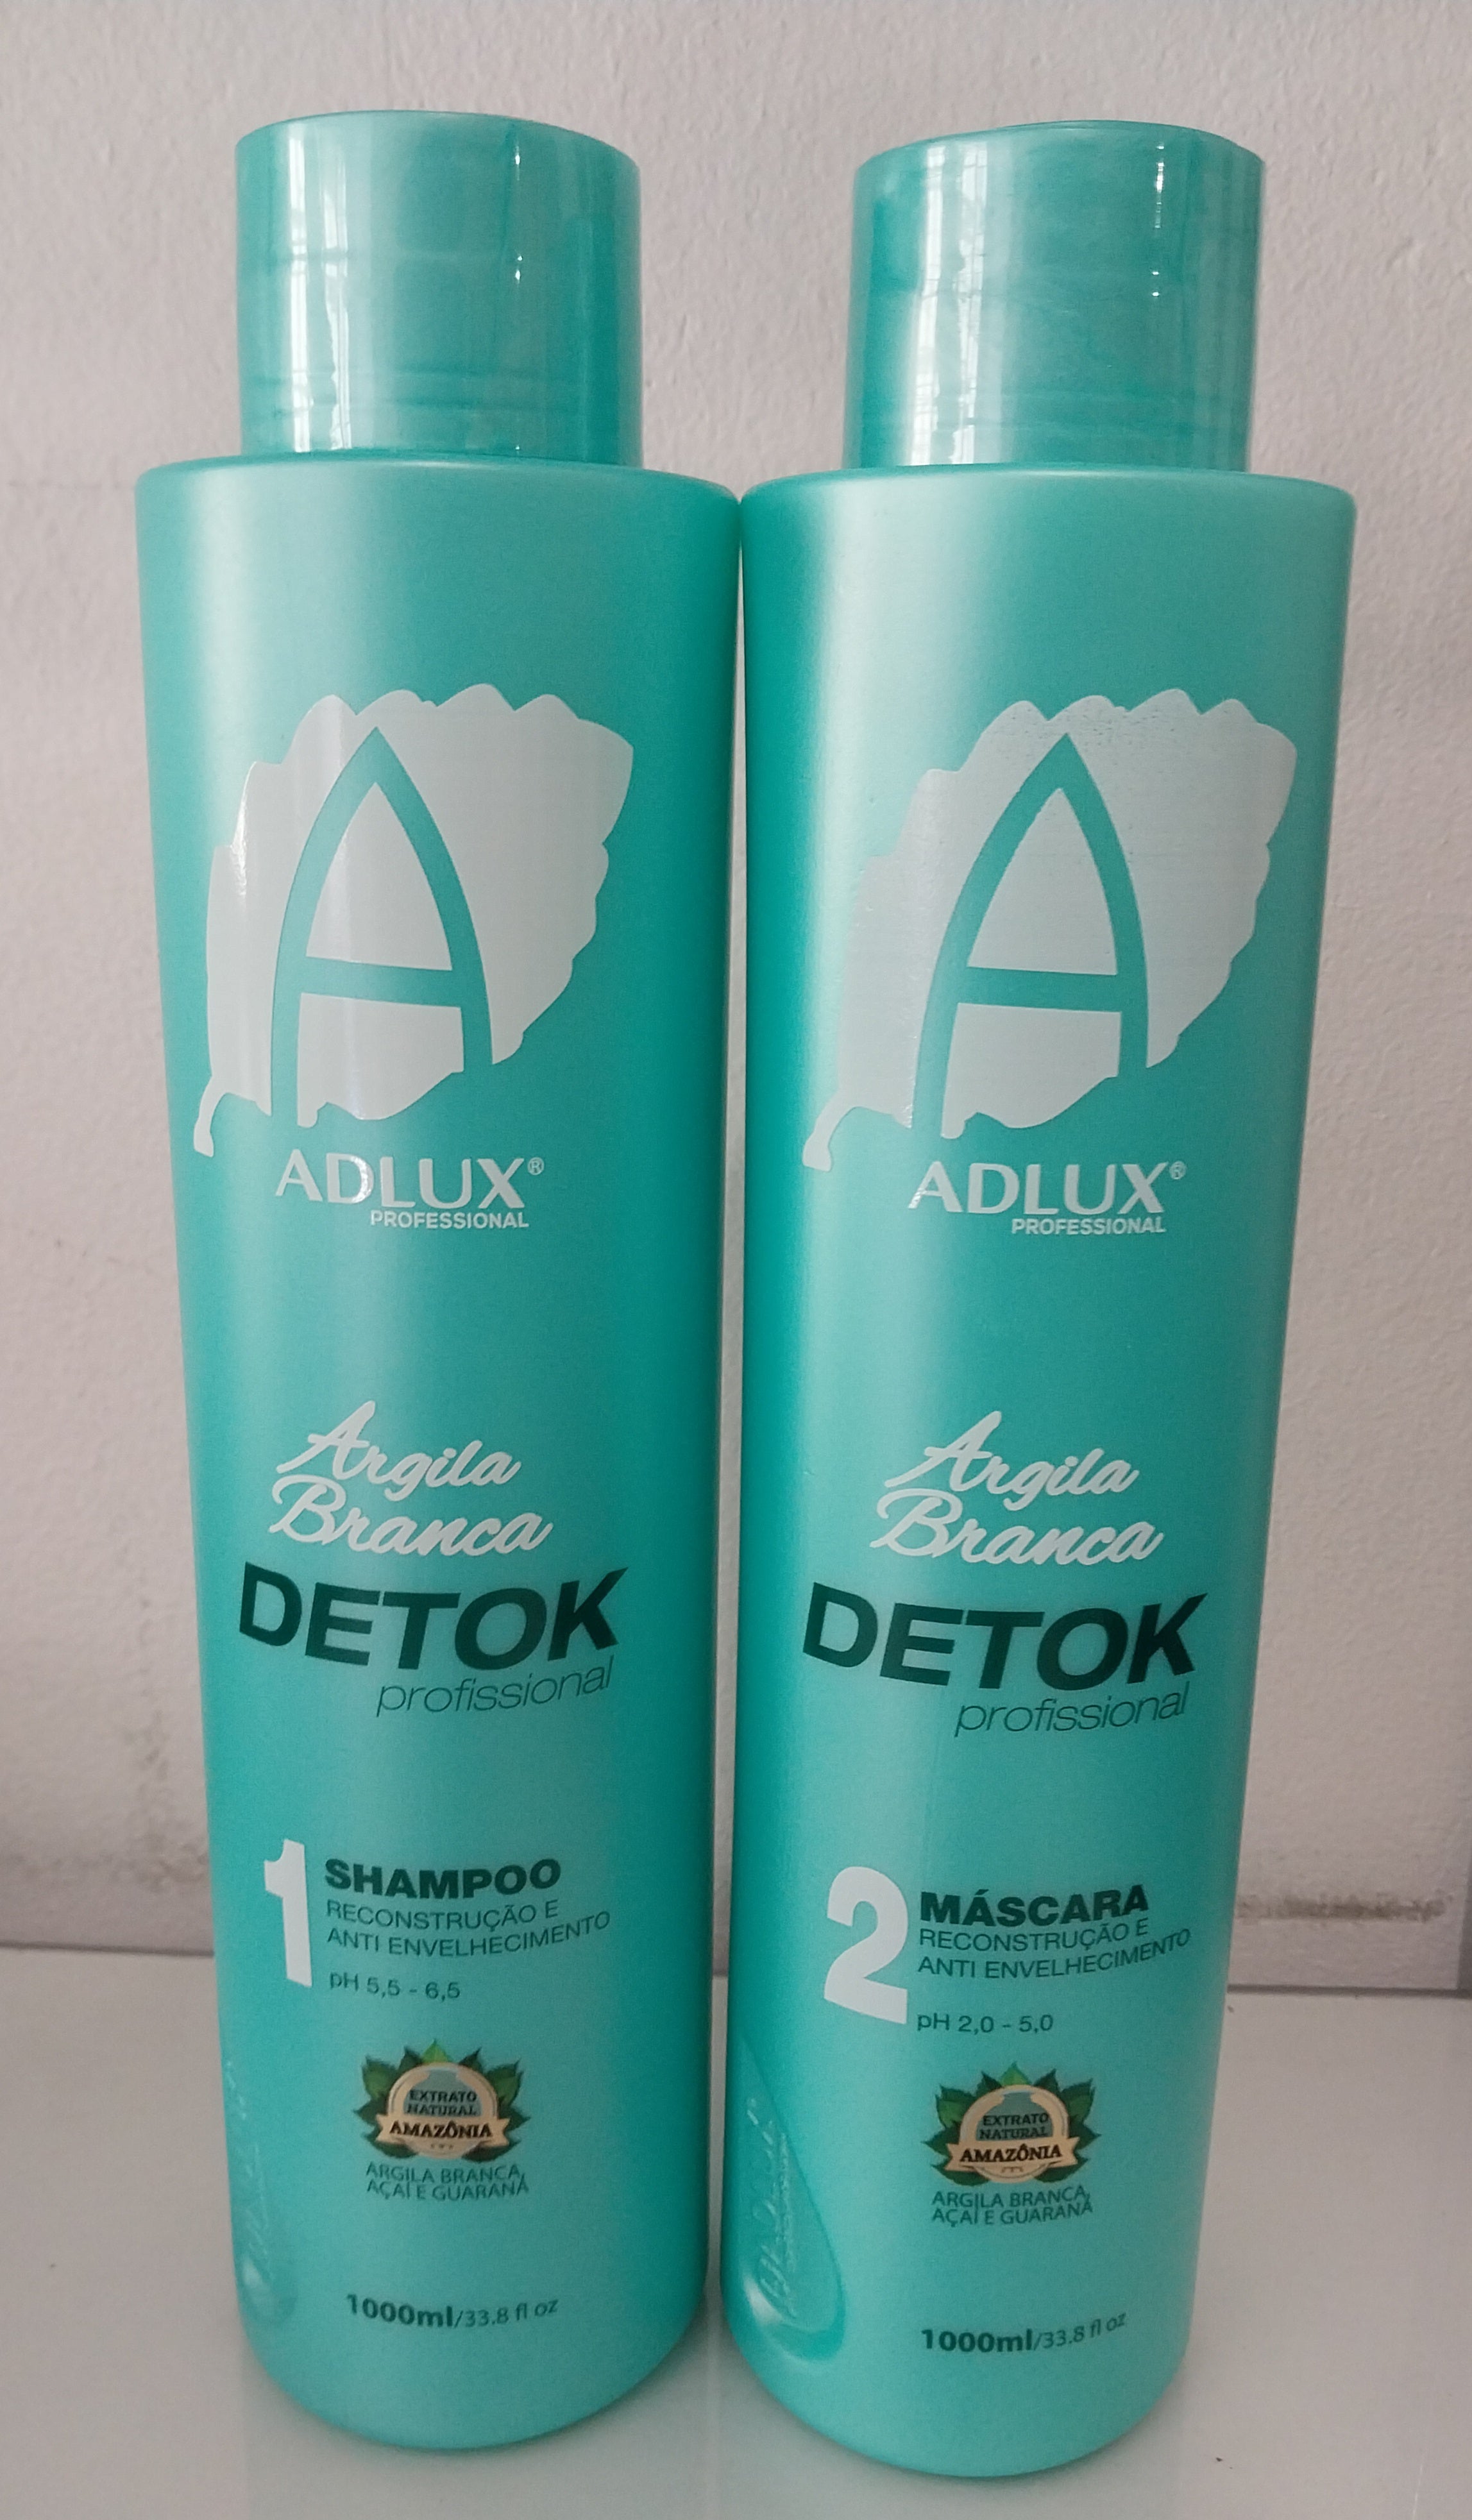 Adlux Hair Treatment Professional Reconstruction White Clay Therapy Hydration Detok's 2x1L - Adlux